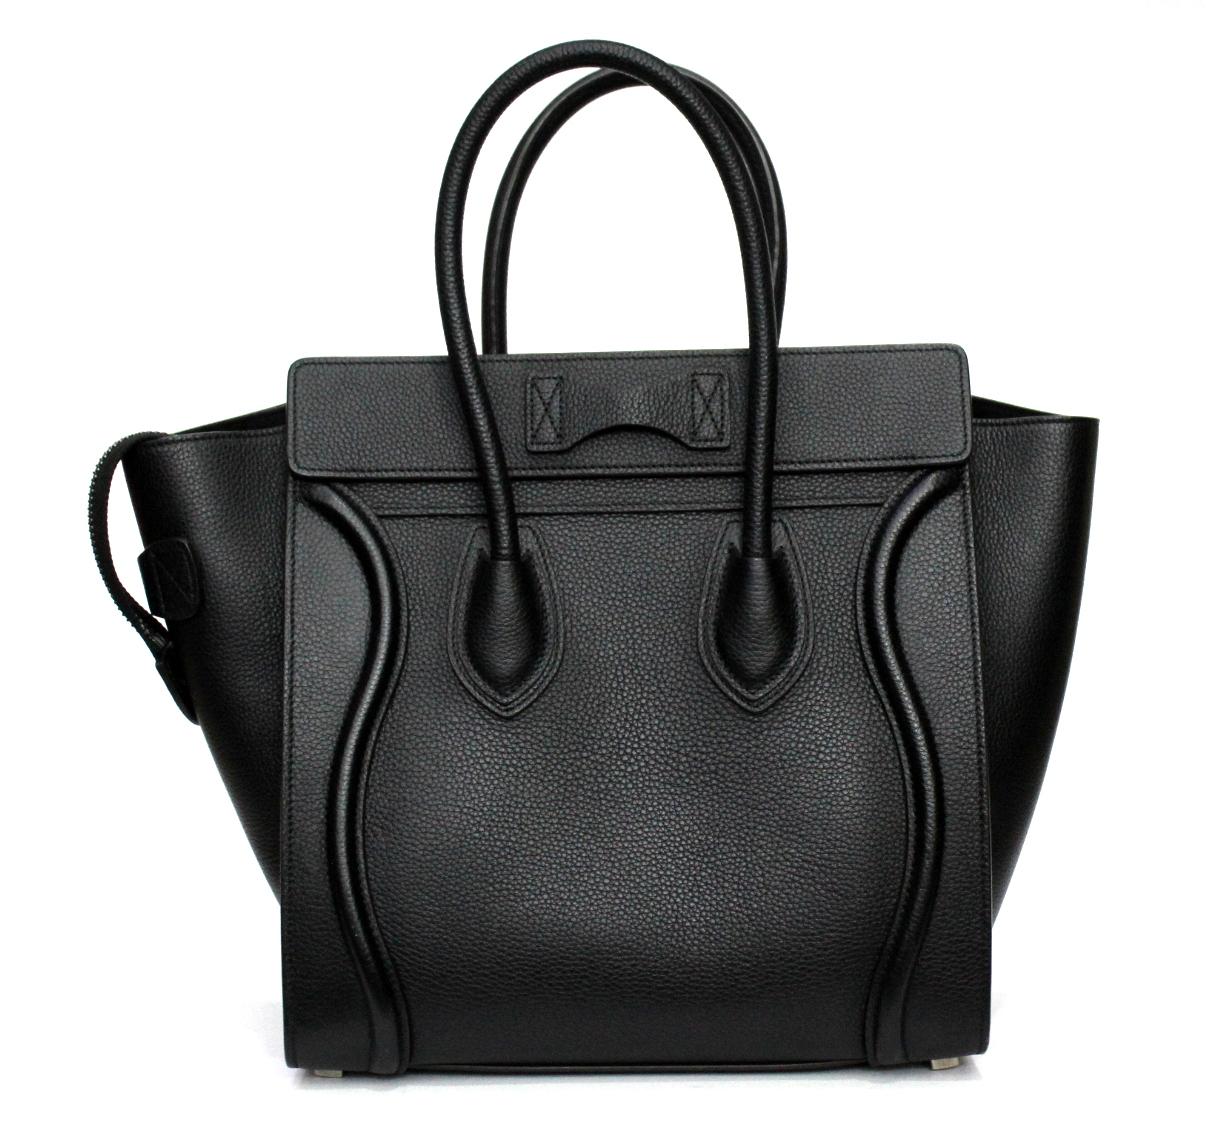 Celine bag Boston Luggage model in mini size made of black hammered leather.